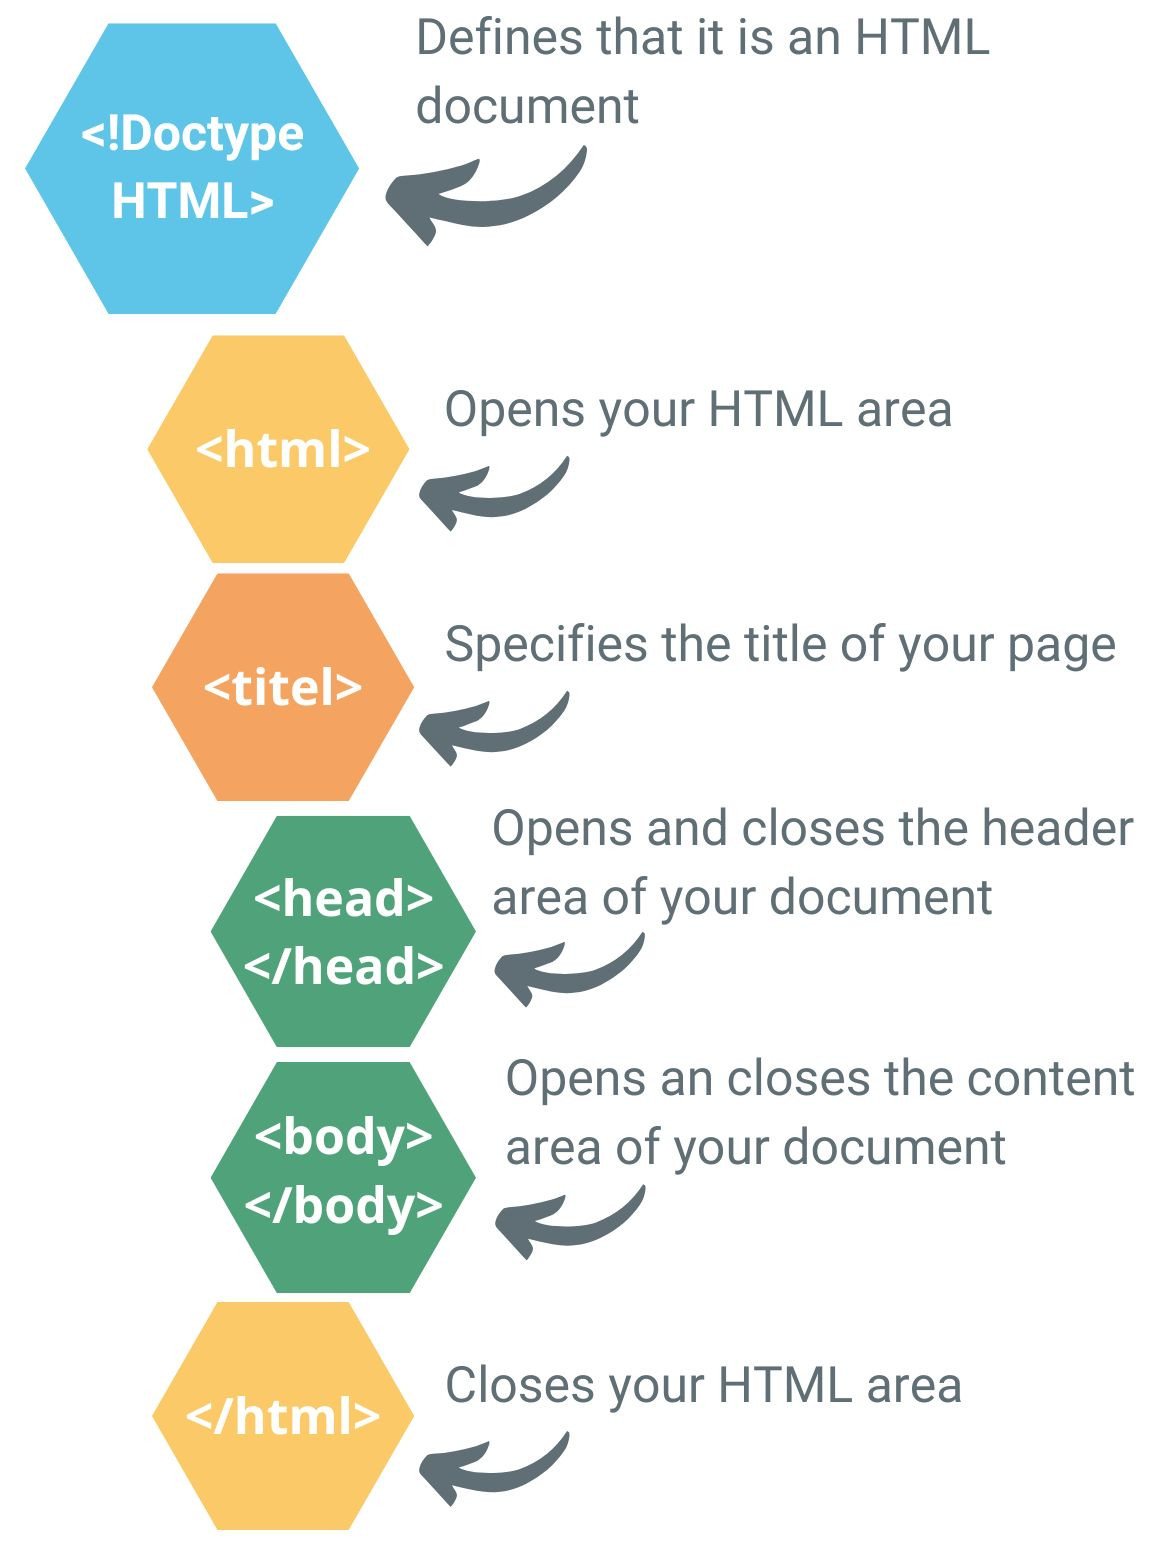 The graphic shows the structure of an HTML document, starting with the HTML area, then the title, the head area, and the body area.